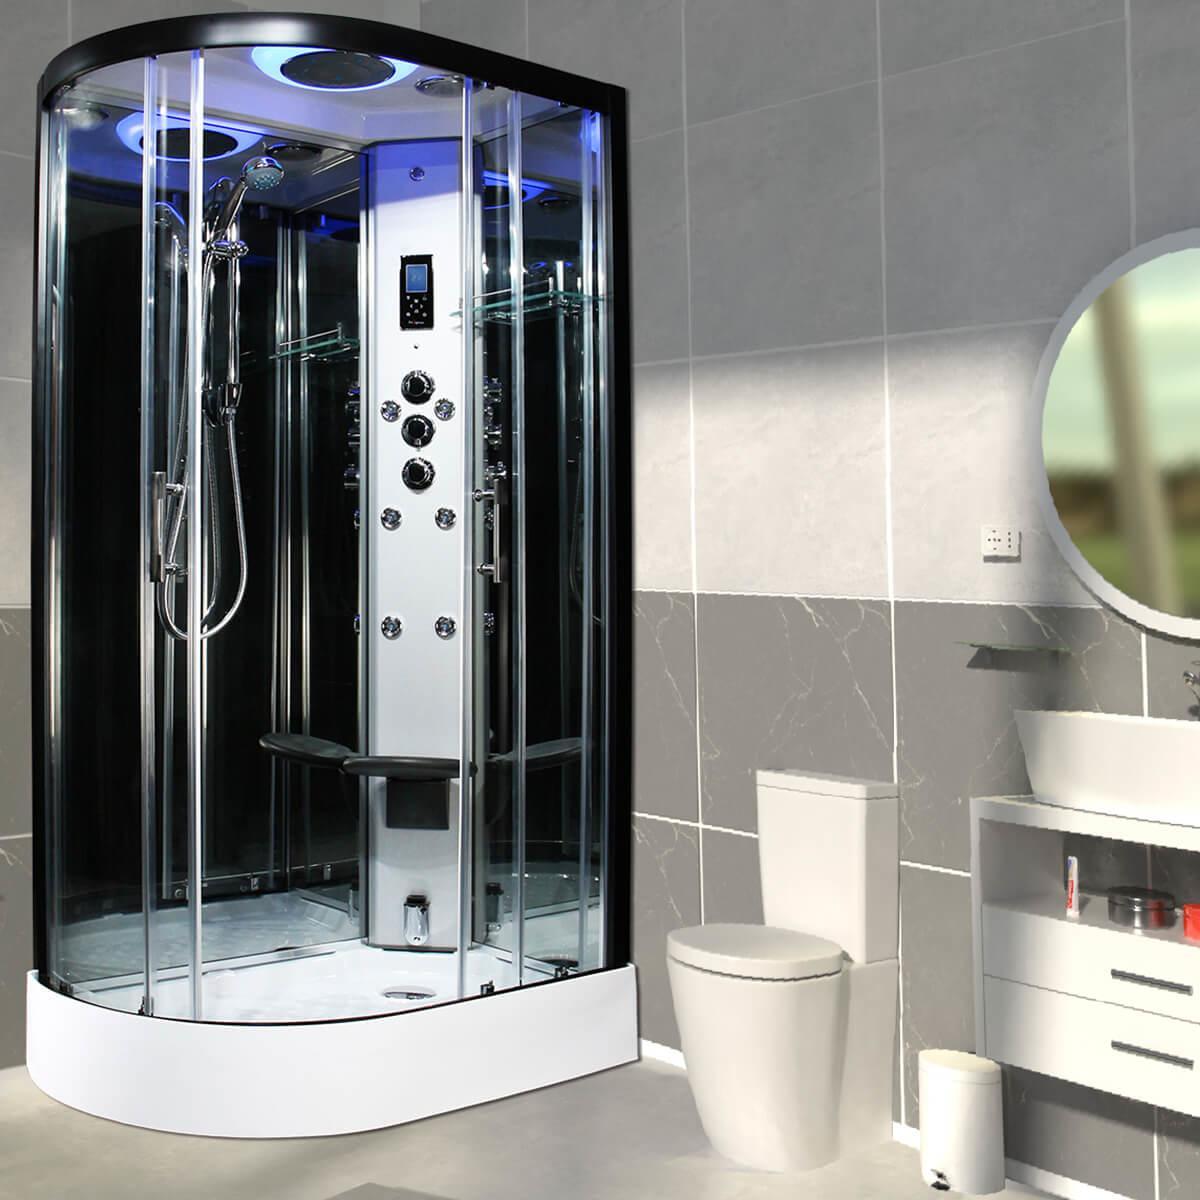 An image of Insignia Premium Right 1100Mm X 700Mm Offset Quadrant Steam Shower Cabin Customi...